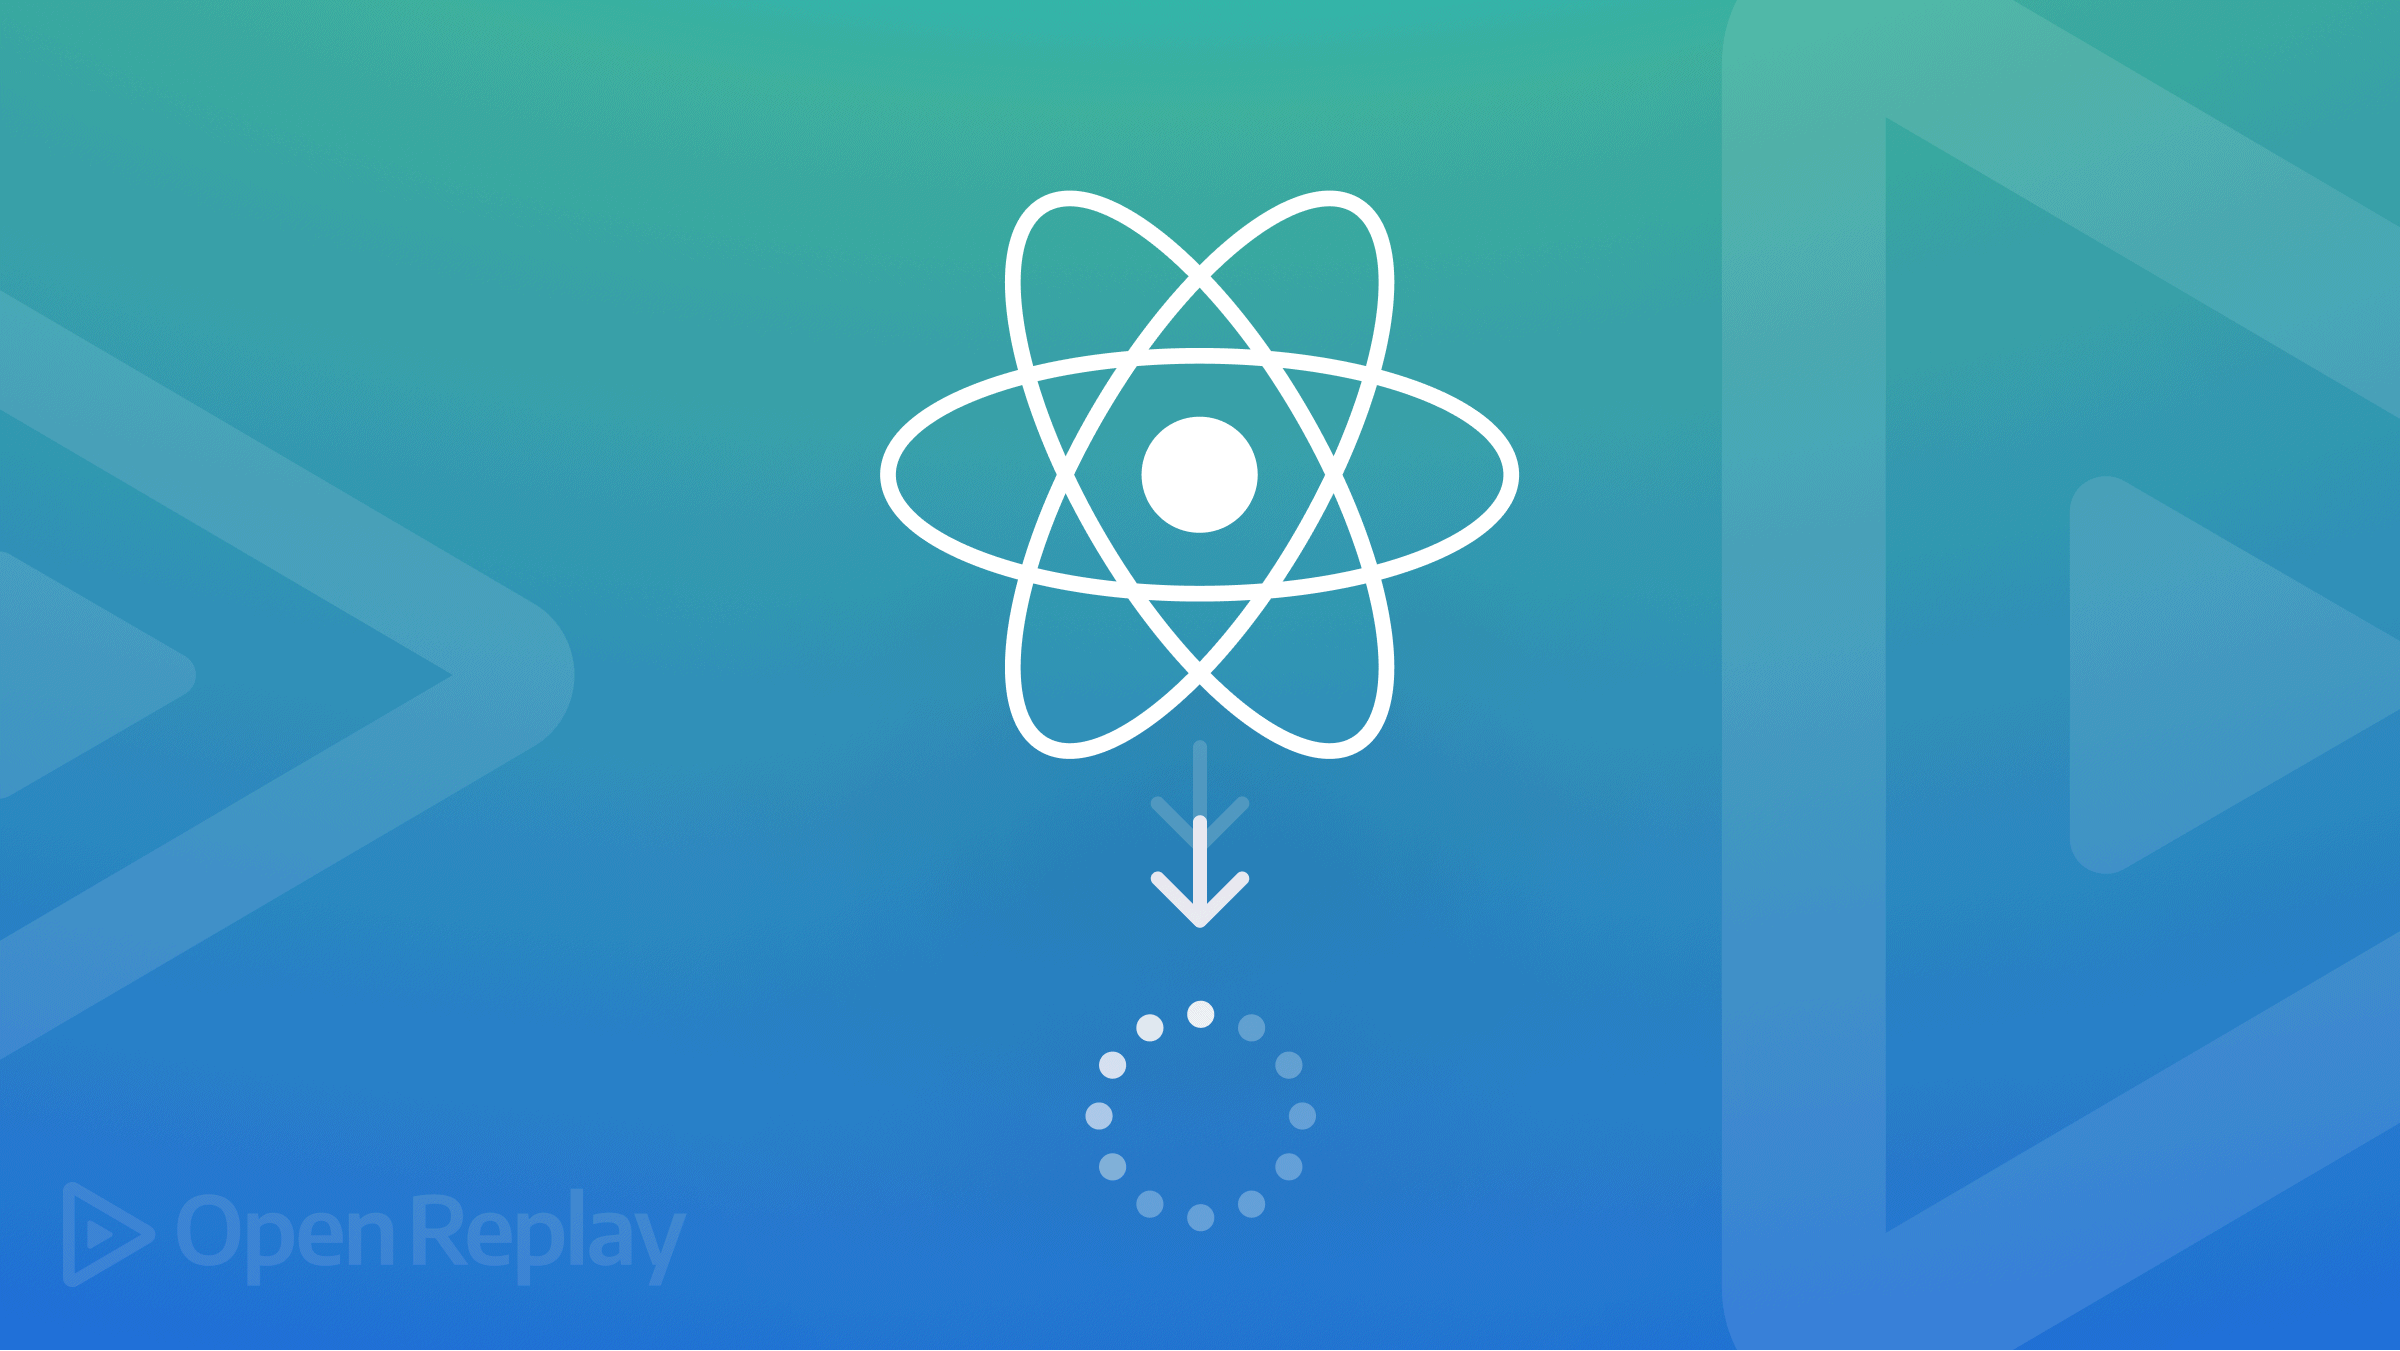 Implementing infinite scrolling in React